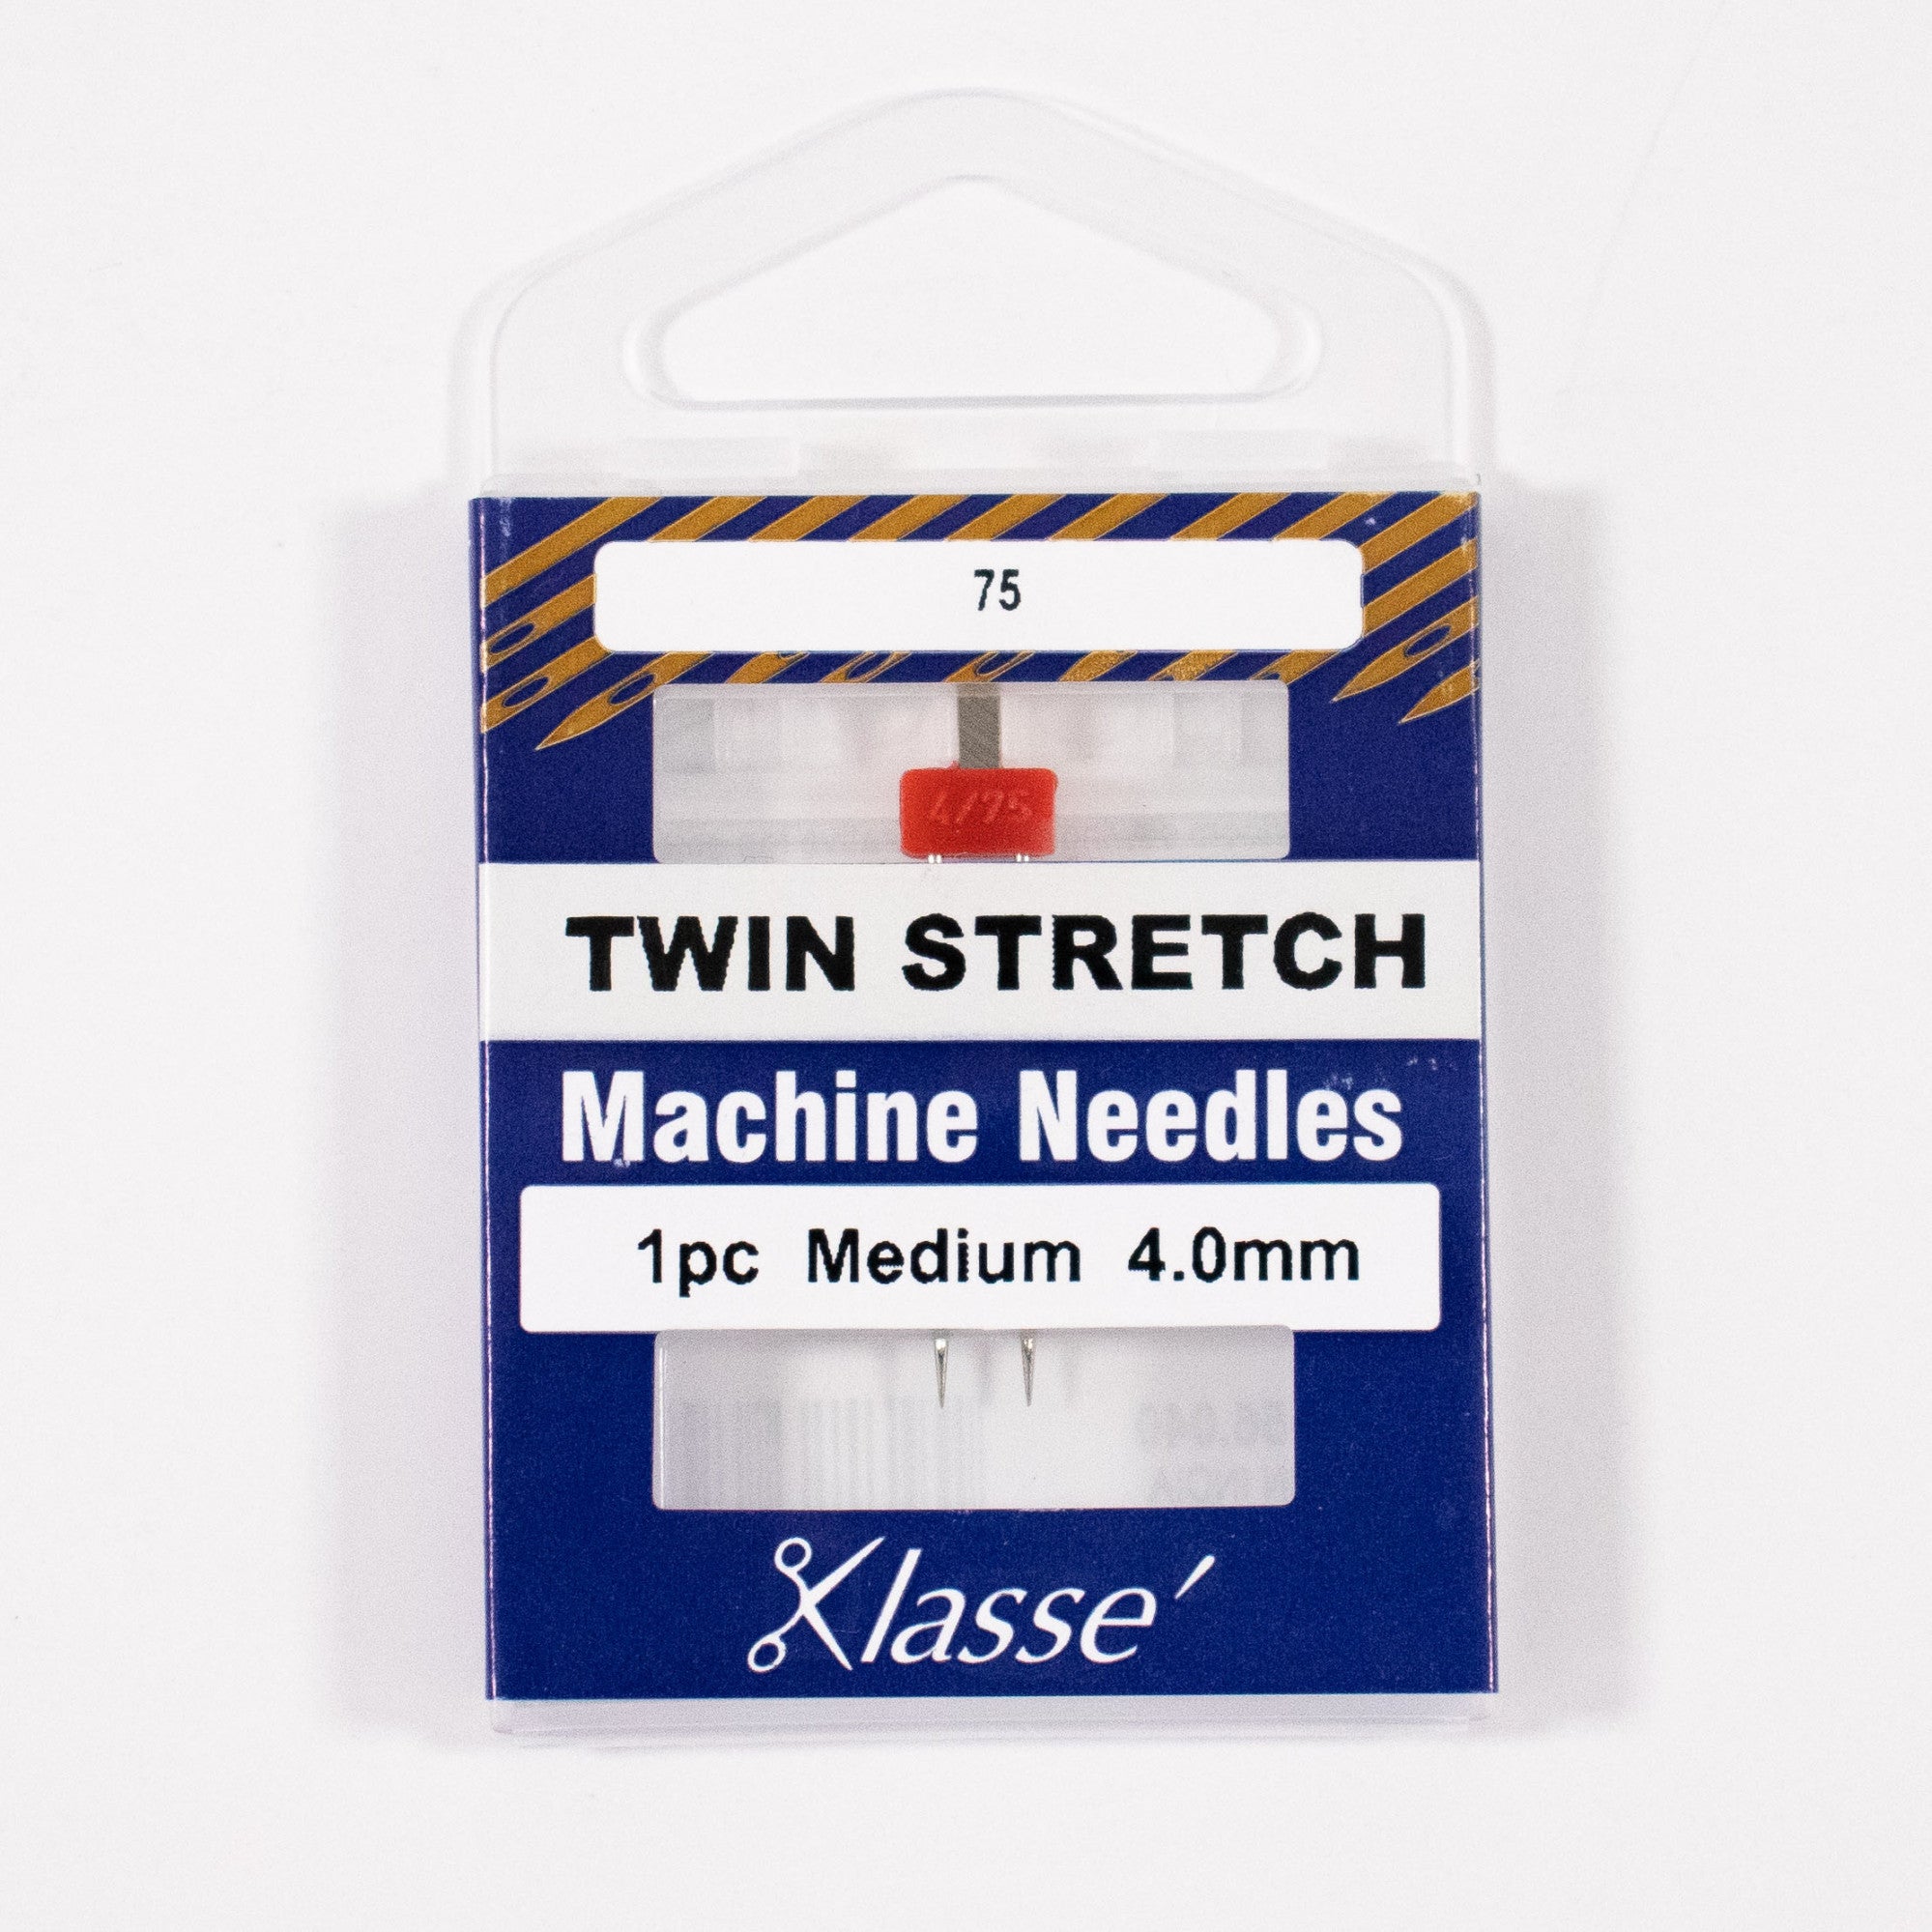 SINGER 4mm Twin Stretch Needles, Size 80/11